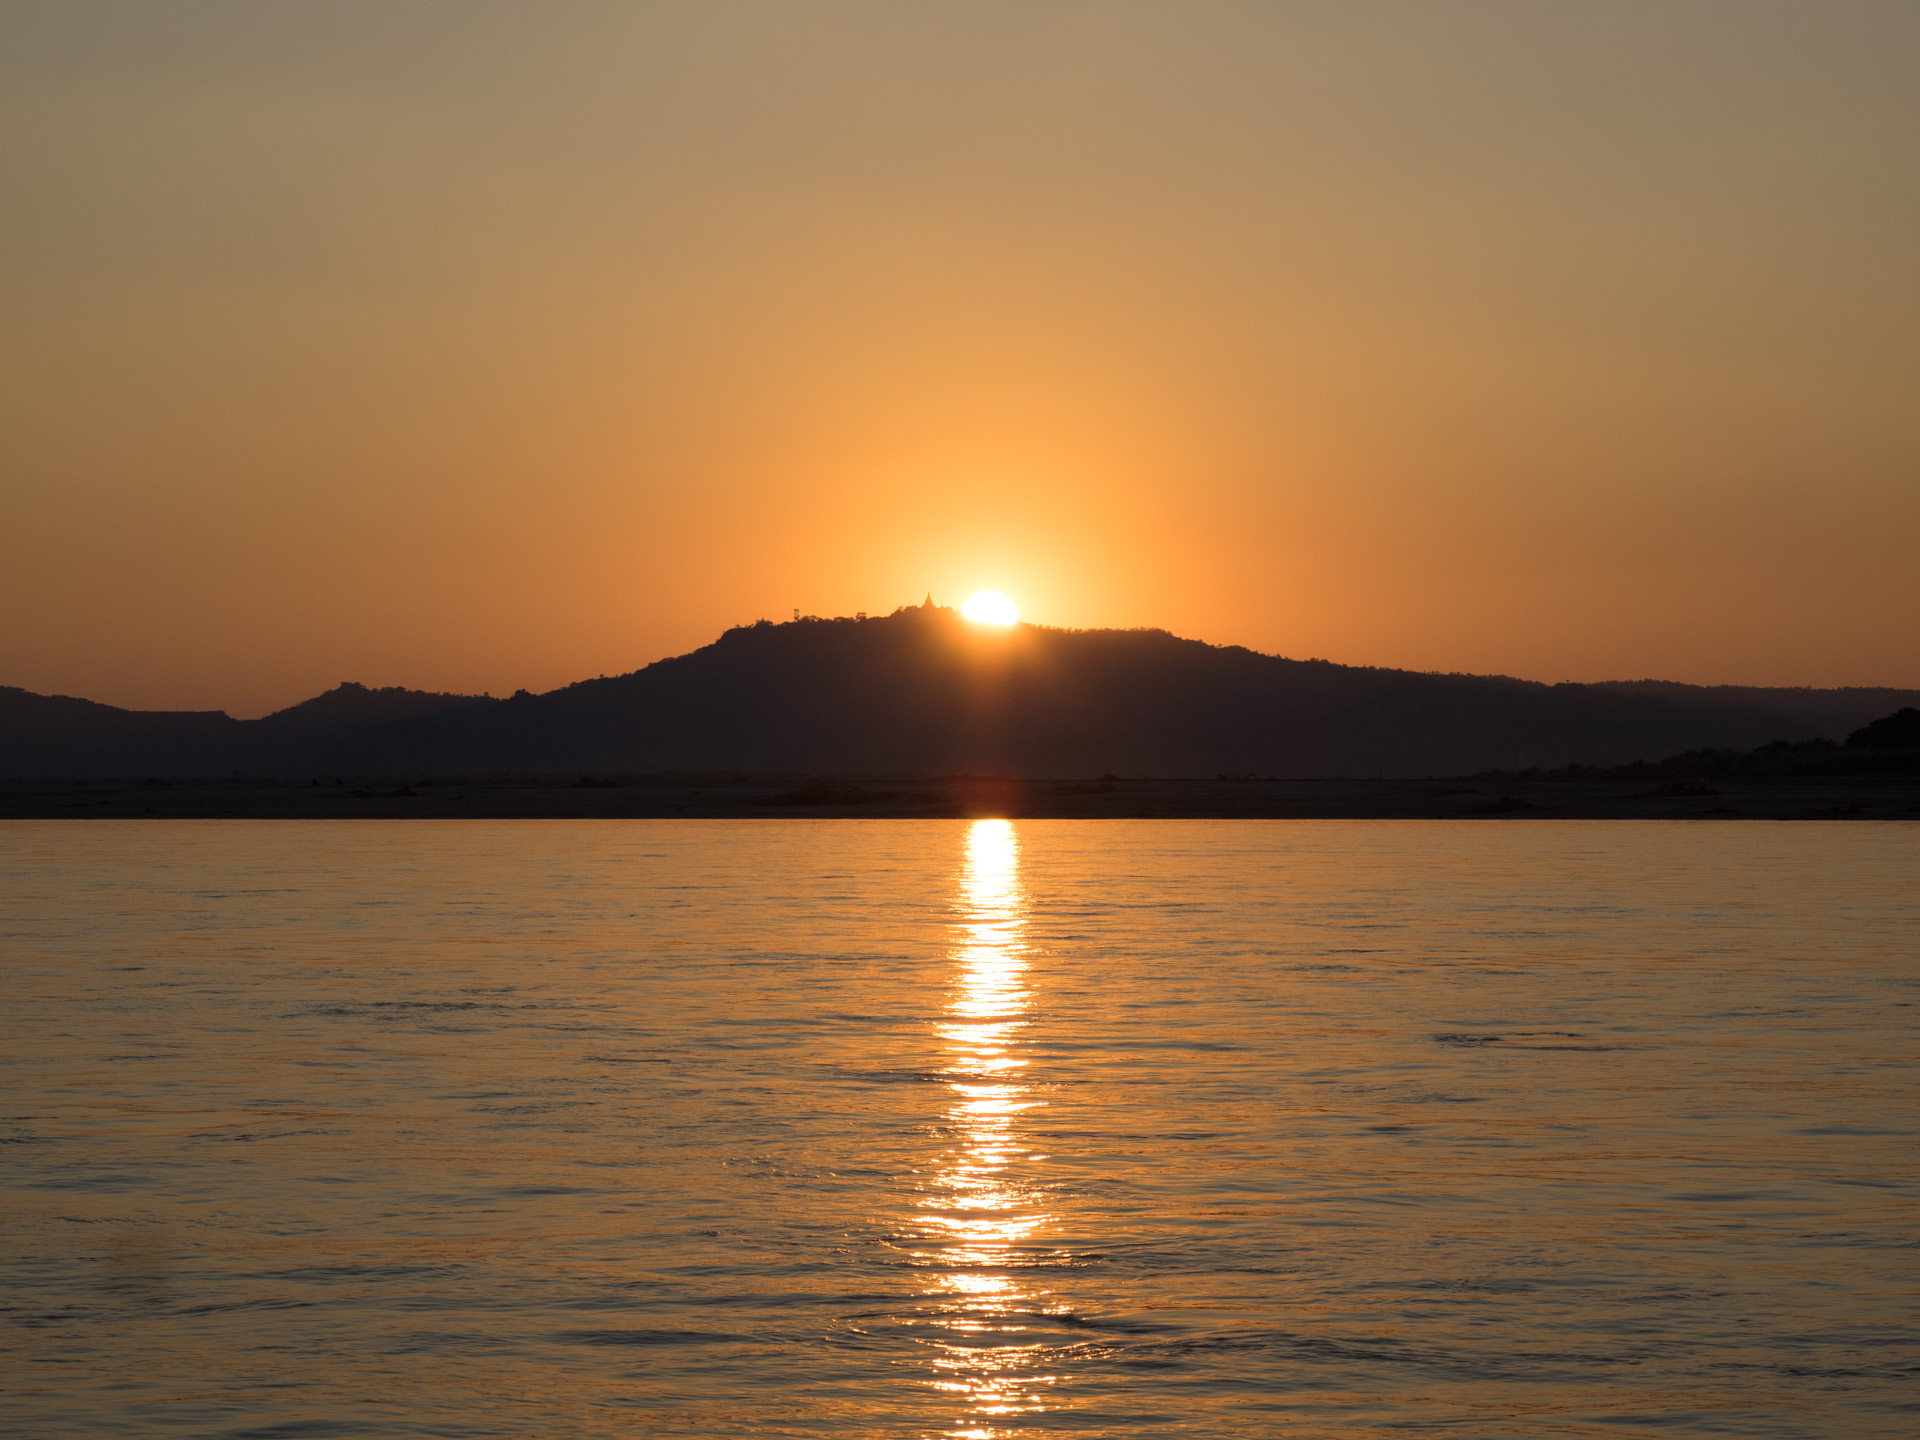 Sunset over Irrawaddy river